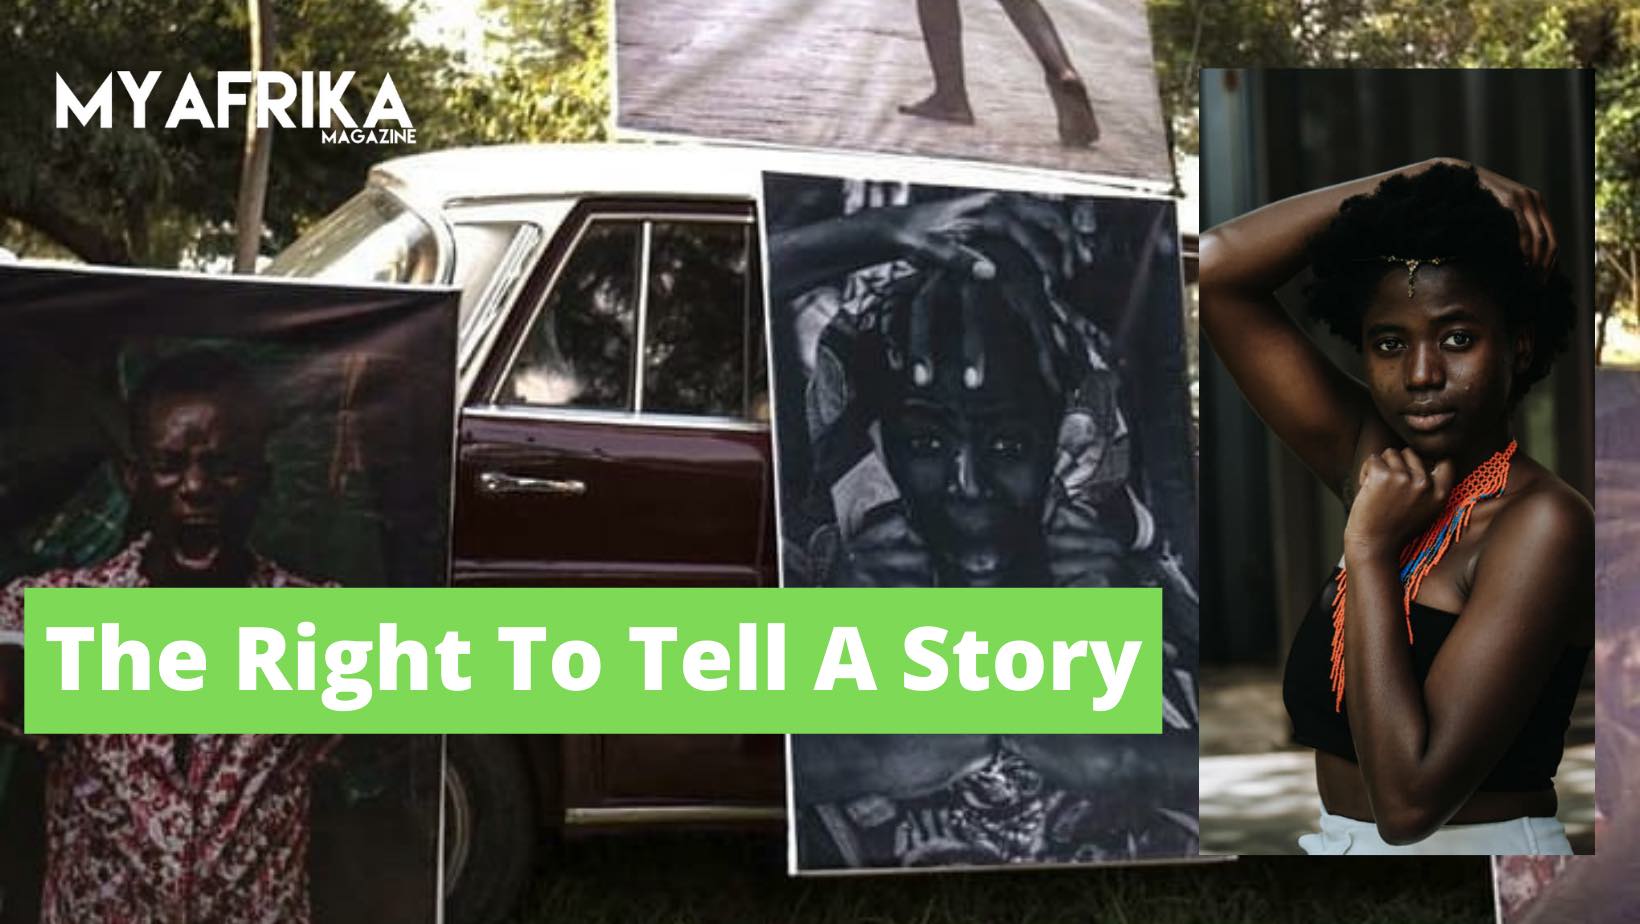 THE RIGHT TO TELL A STORY